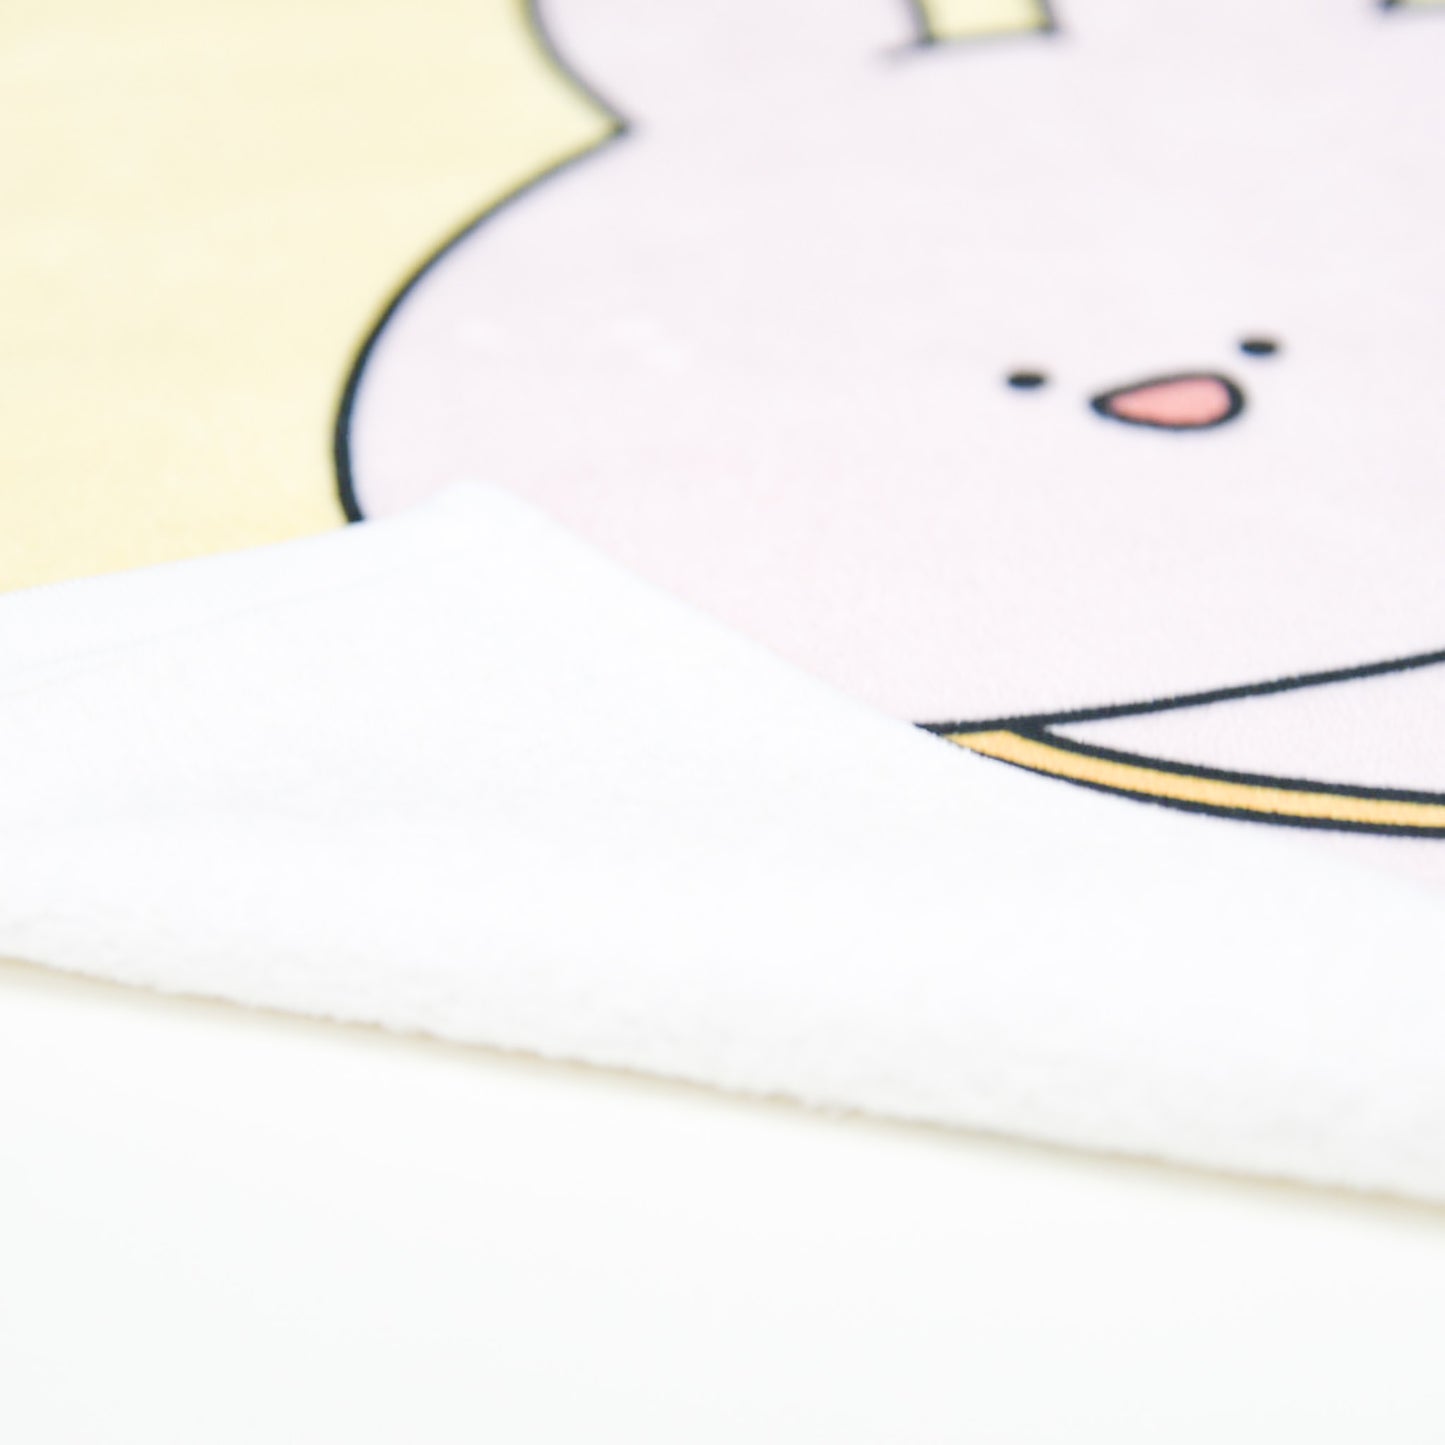 [Asamimi-chan] Face towel (Don't deep) [Shipped in early March]